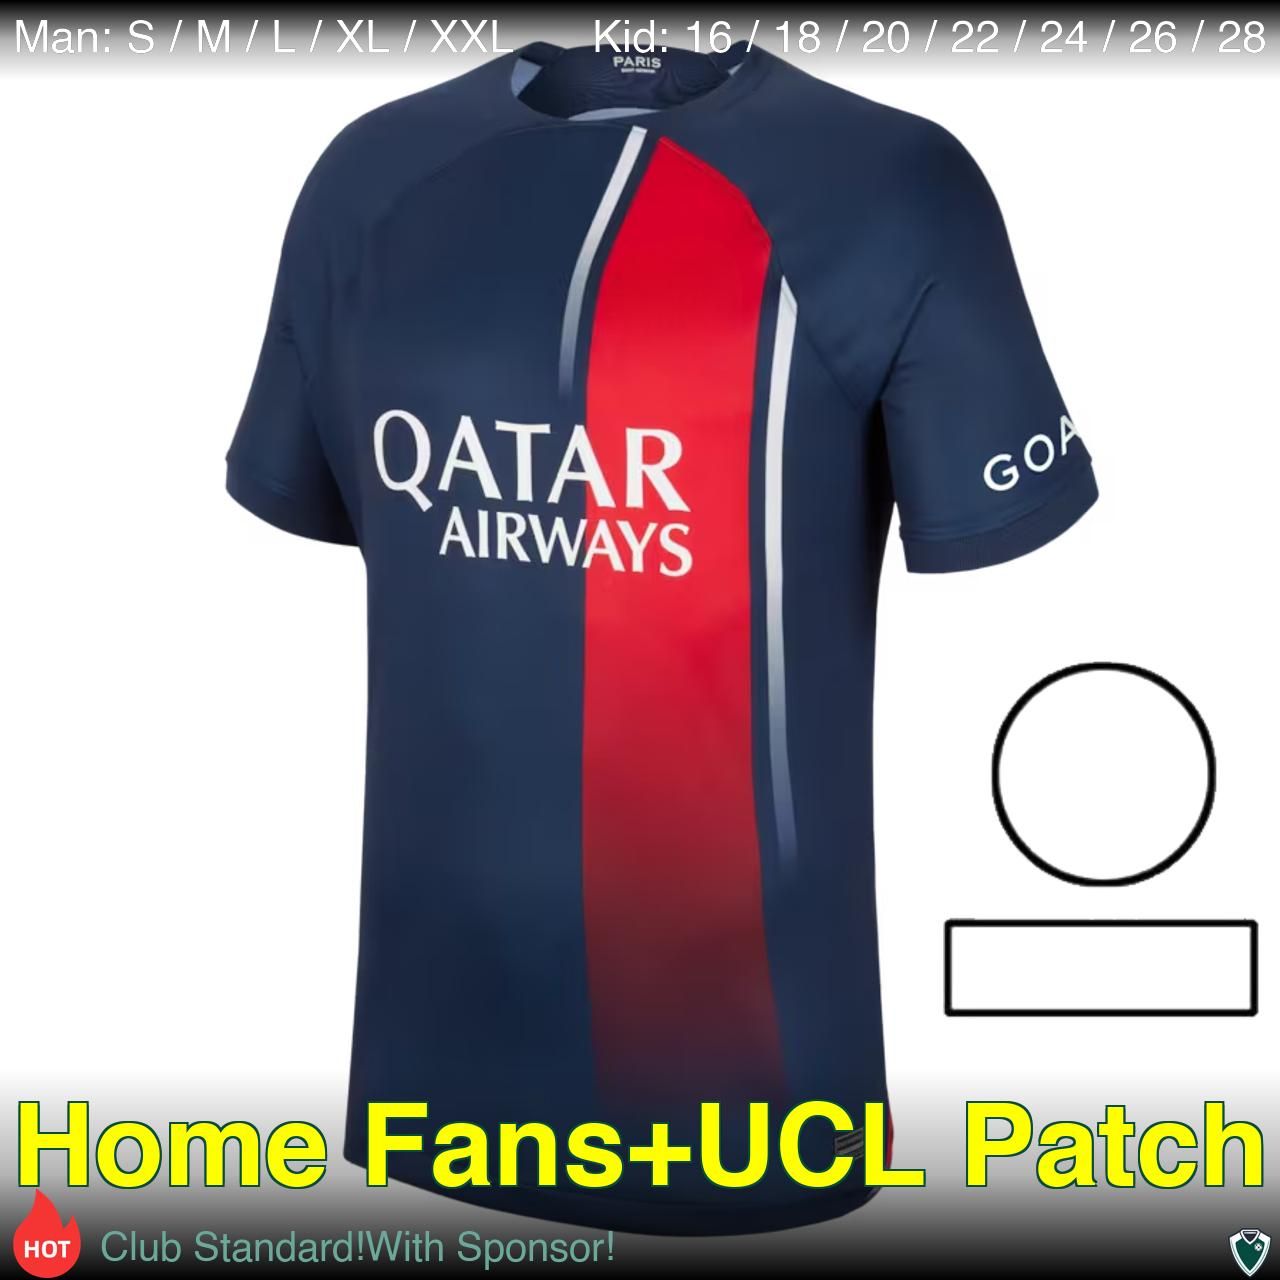 Home Fans UCL